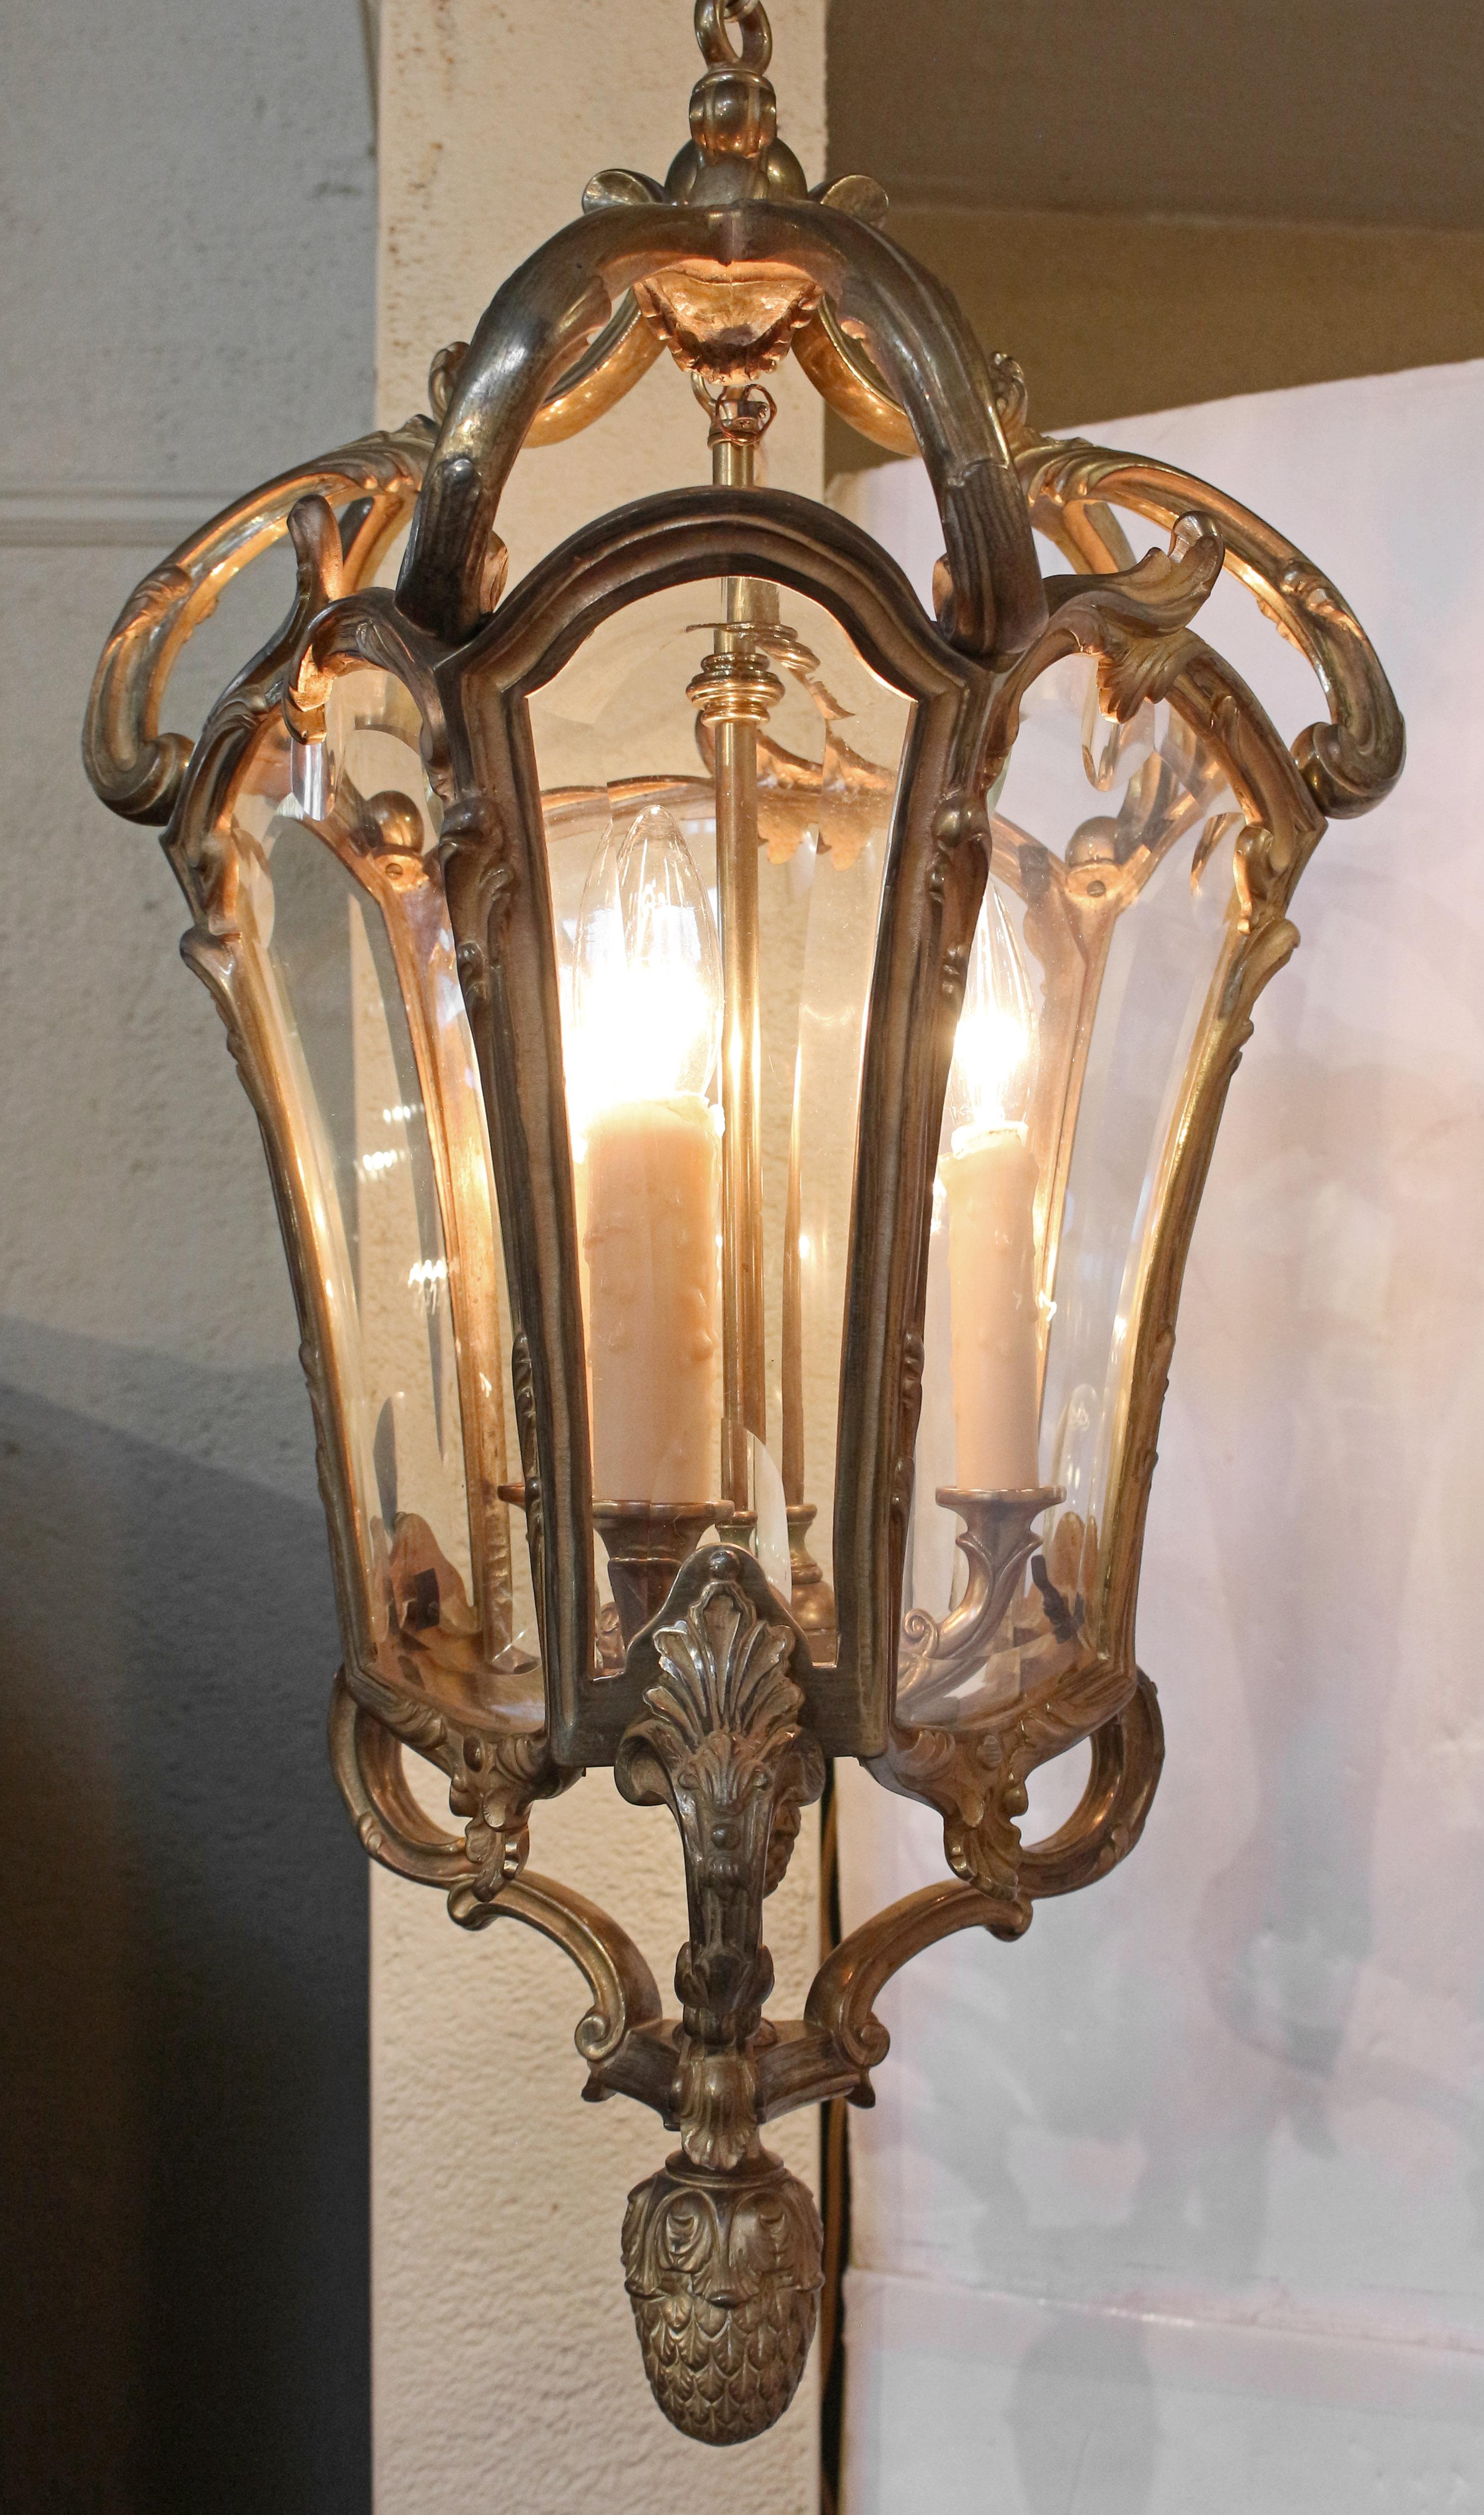 Early 20th Century French Gilt Bronze & Glass Hall Lantern For Sale 5